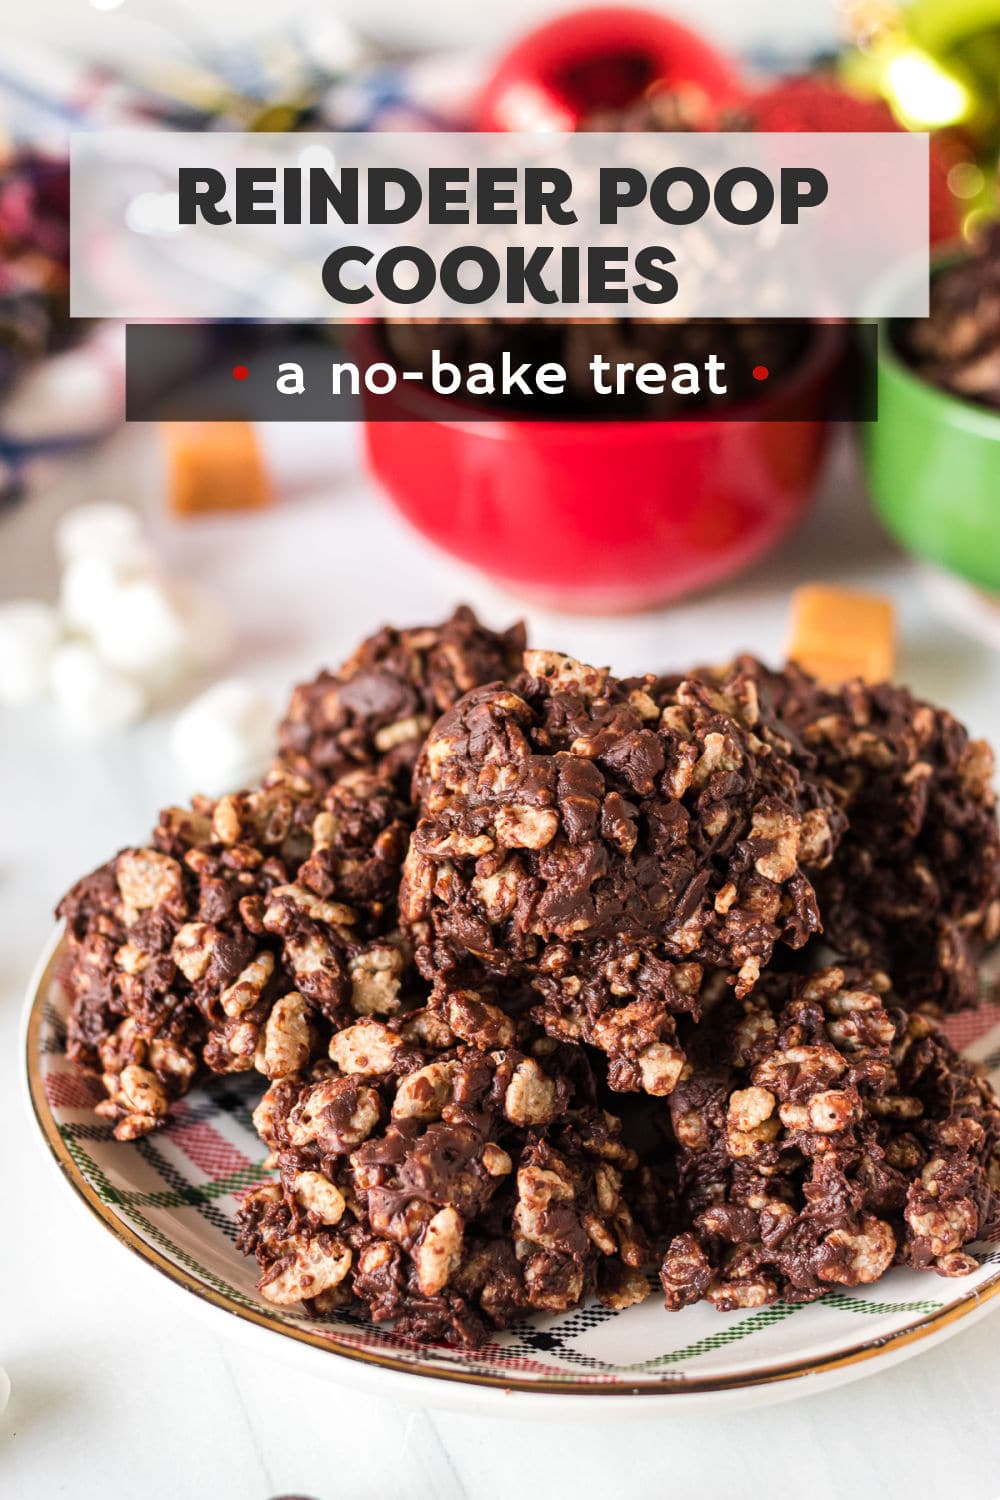 These Reindeer Poop Cookies will make kids and adults snicker while also being your new favorite no-bake Christmas cookie! Filled with chewy caramels, marshmallows, rice krispies, and a deep chocolatey flavor, these Reindeer Poop cookies are sure to be a hit. | www.persnicketyplates.com